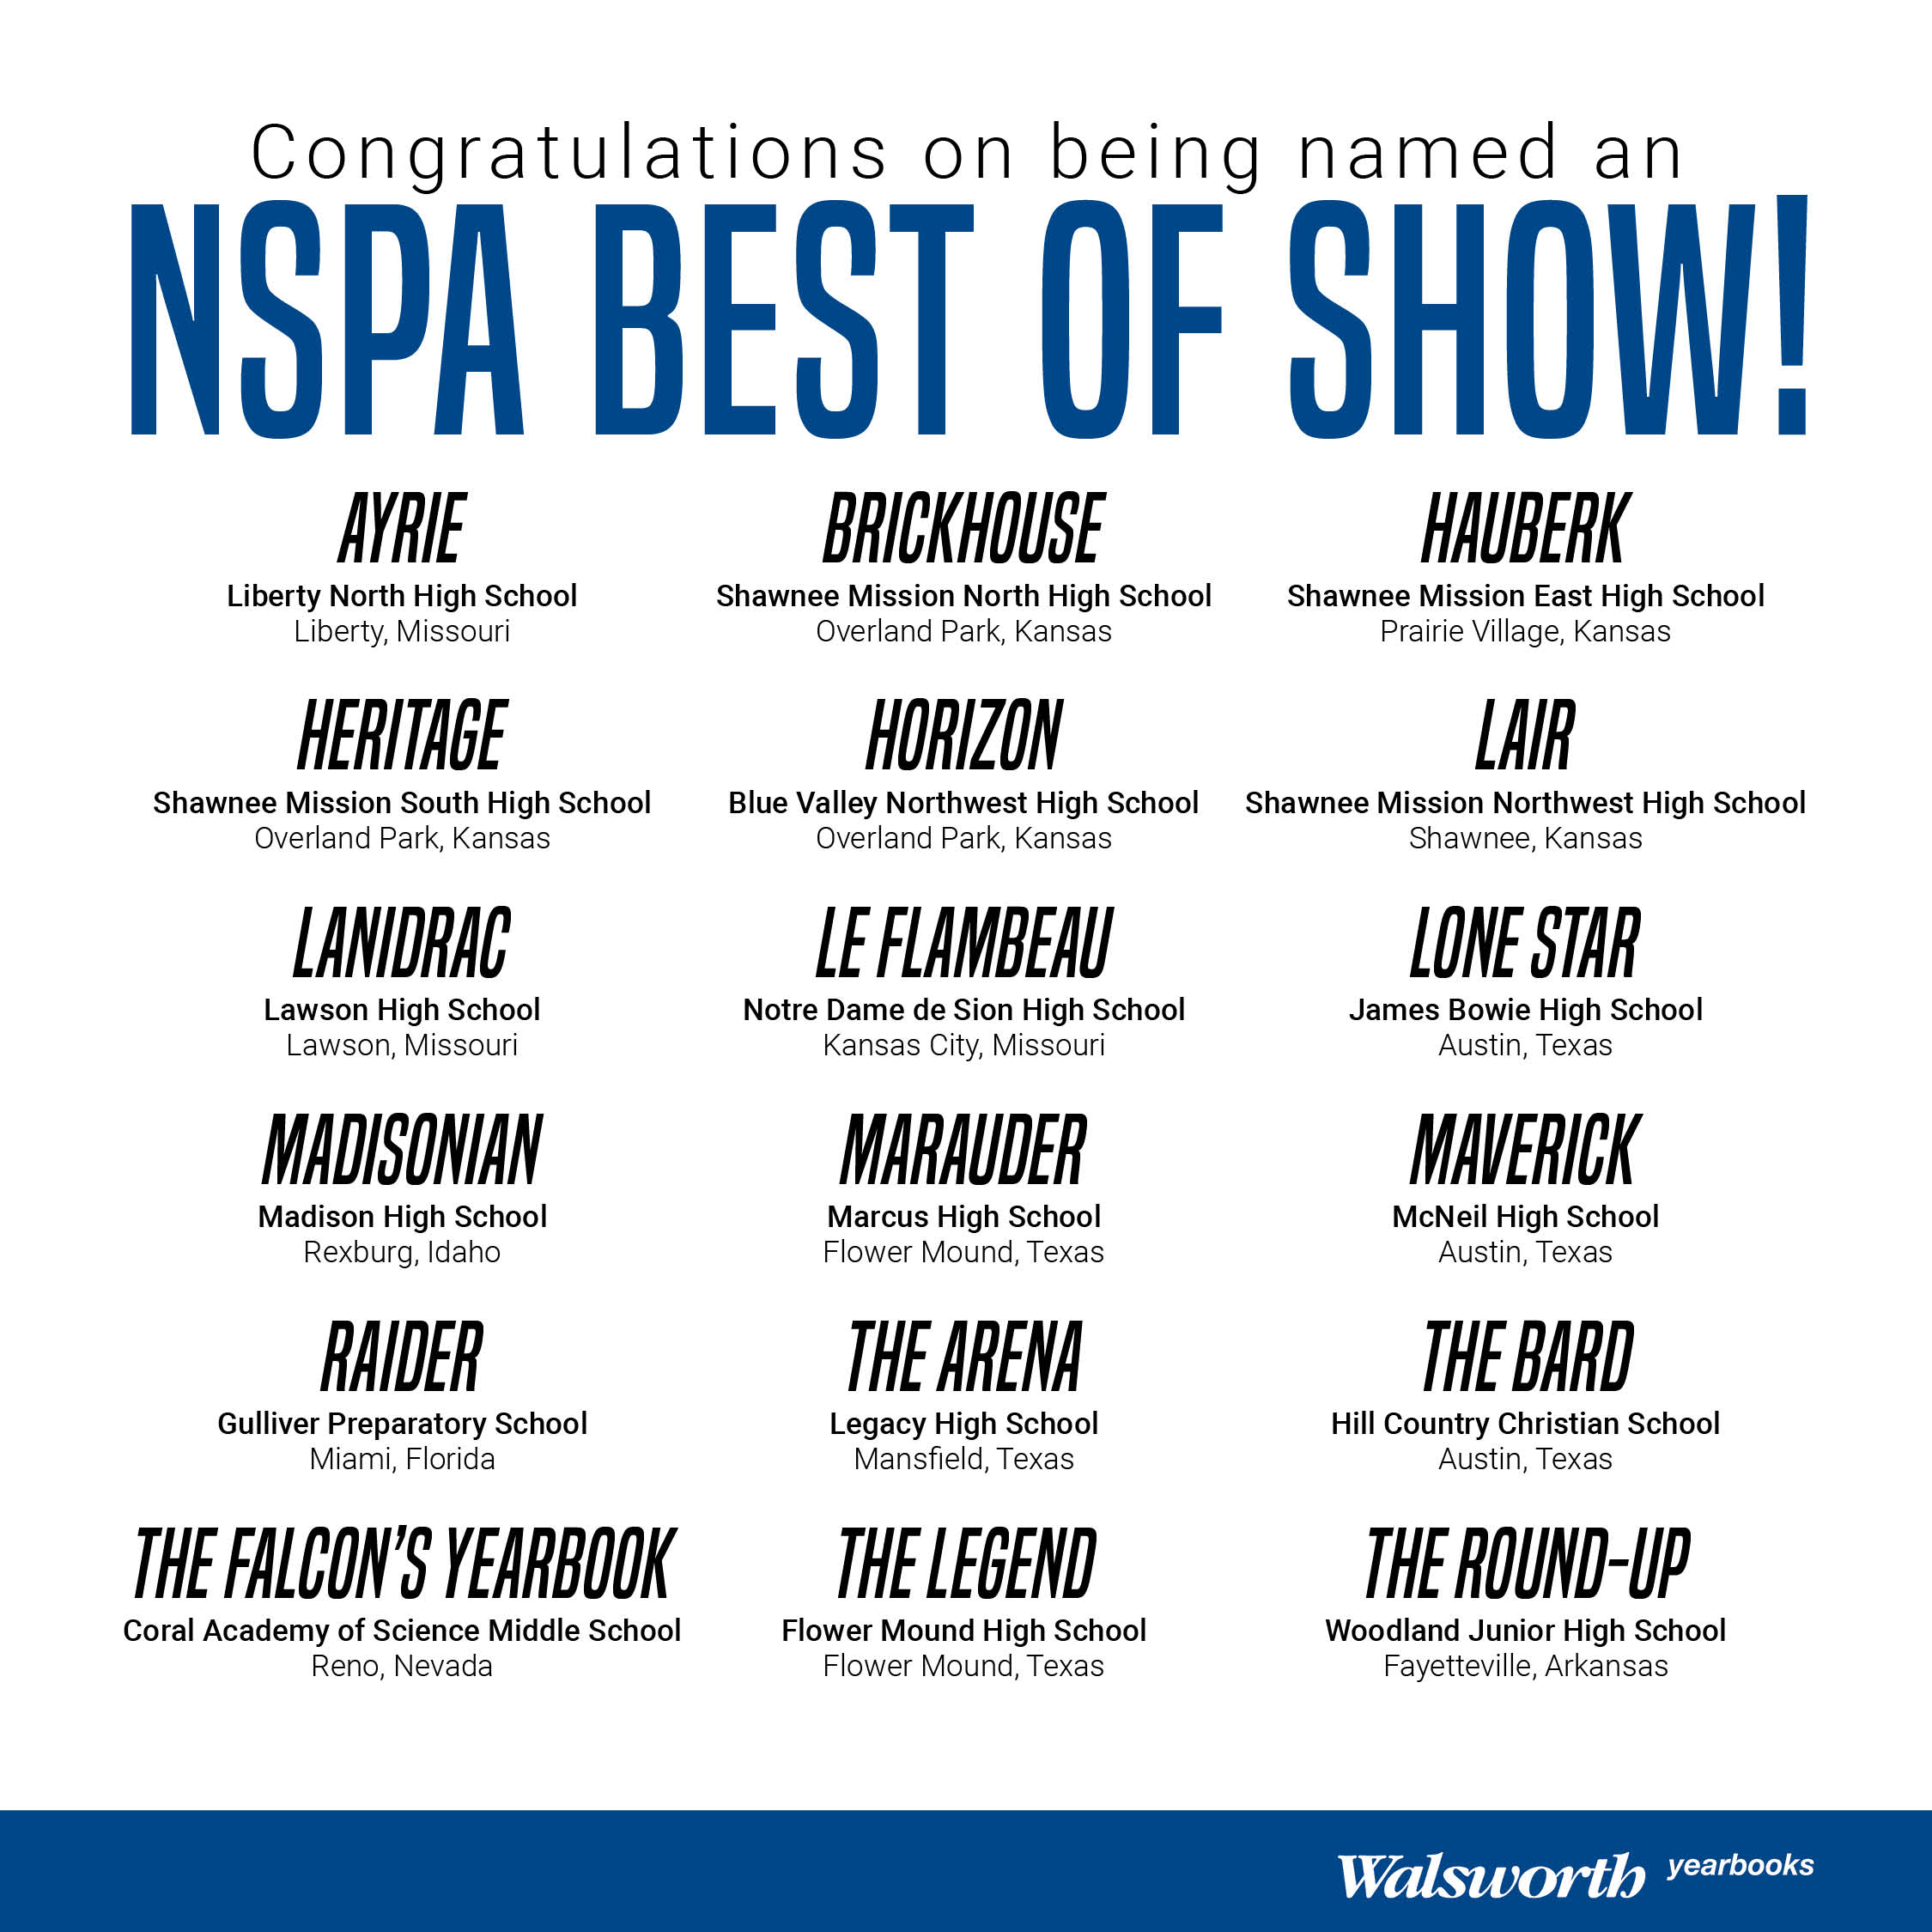 NSPA Best of Show Winner List. Read the article to get the full list